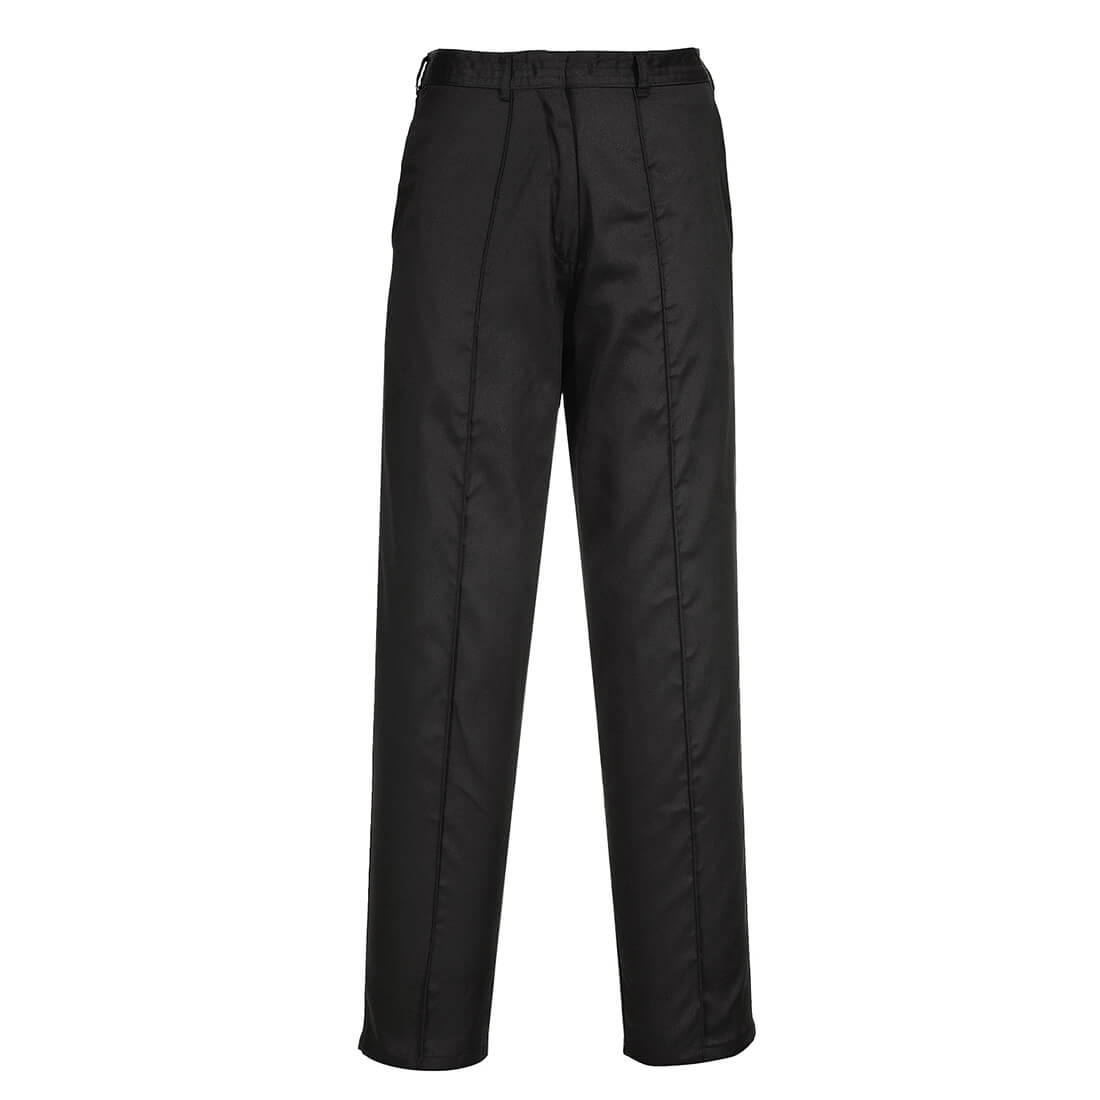 Image of Portwest LW97 ladies Elasticated Trousers Black 2XL 31"